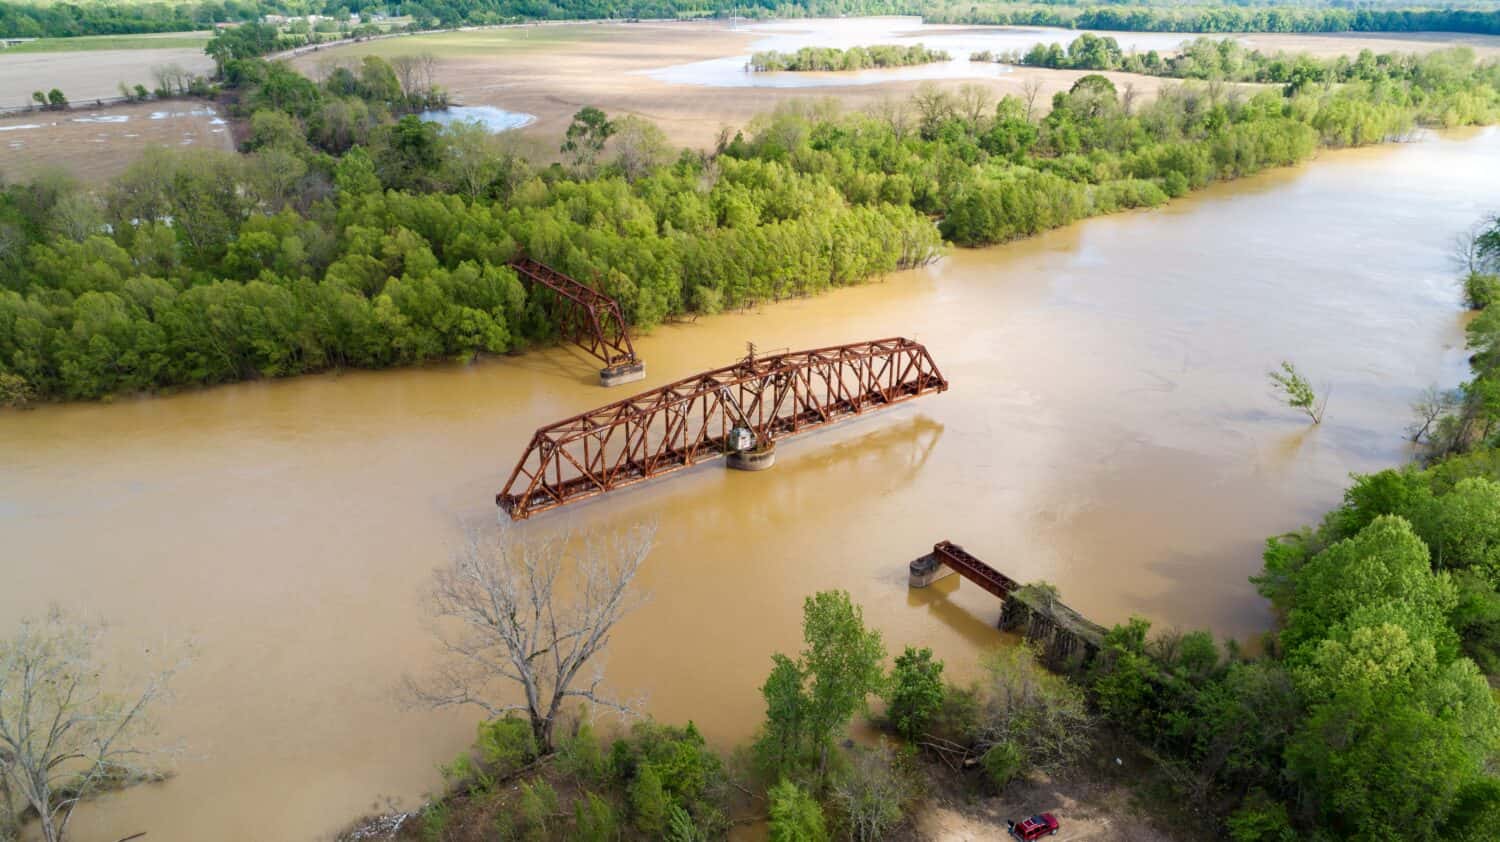 Aerial view of an abandoned railway swing bridge over the Yazoo River near Redwood, Mississippi.